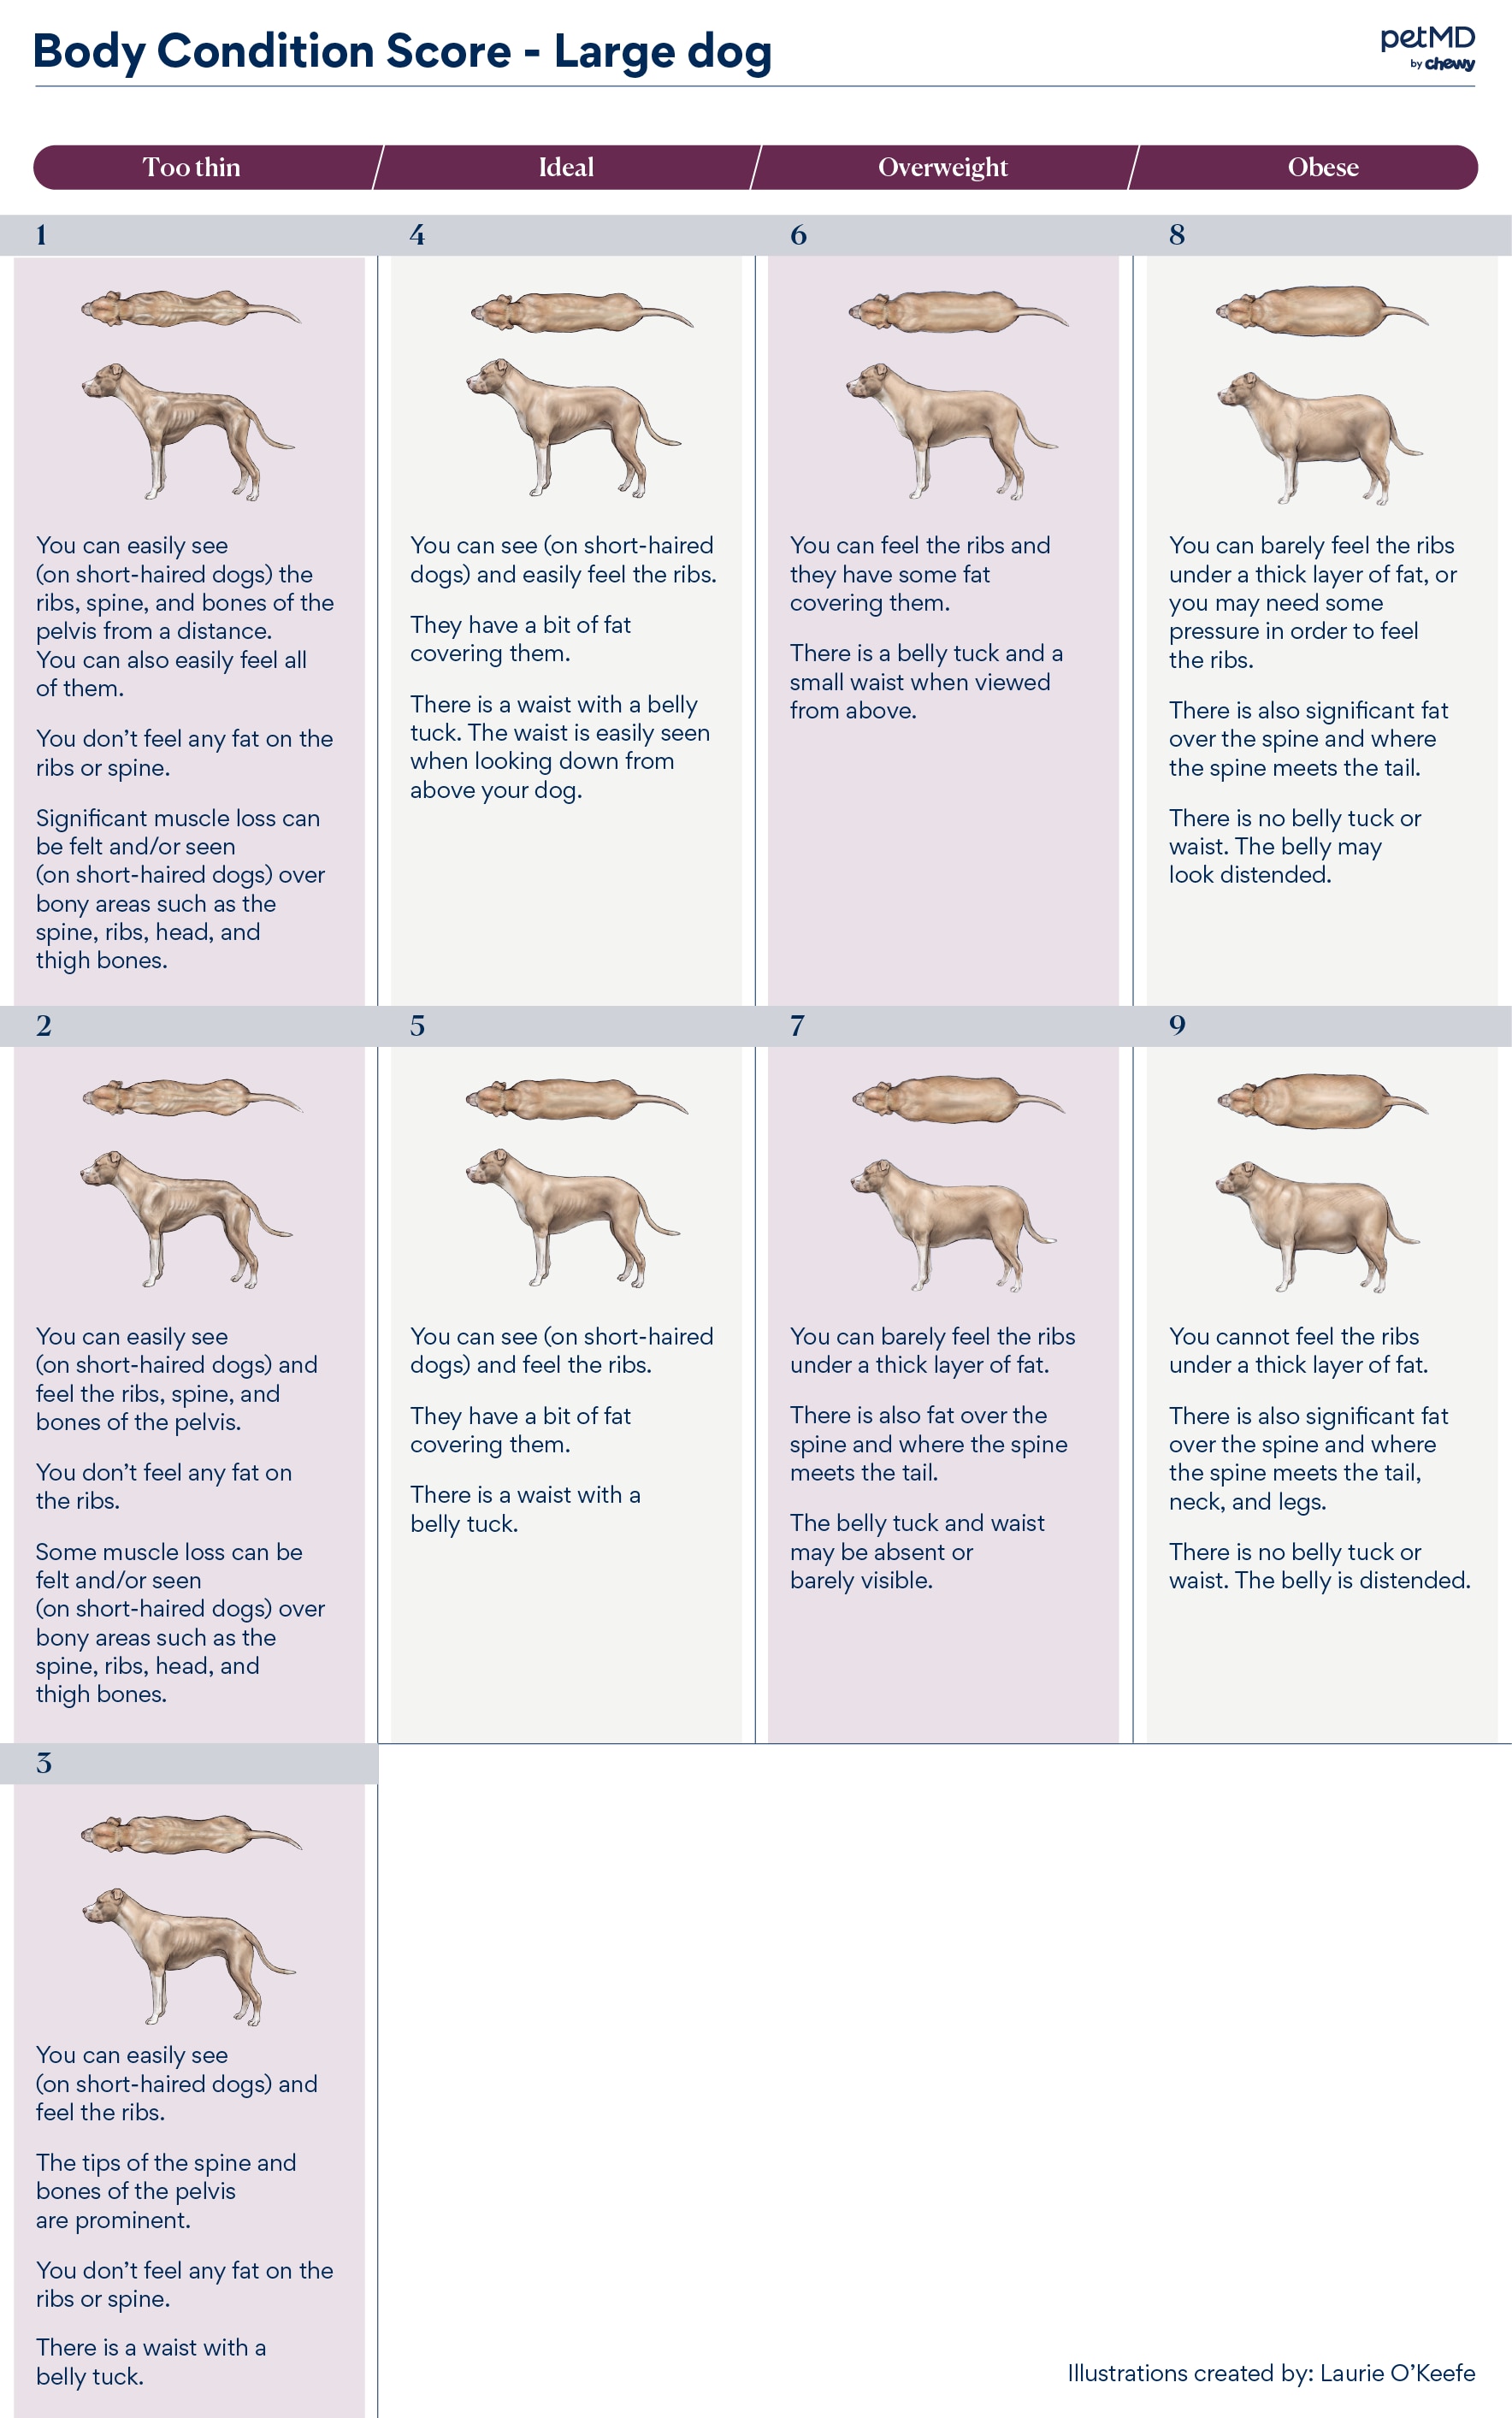 body condition score for large breed dogs